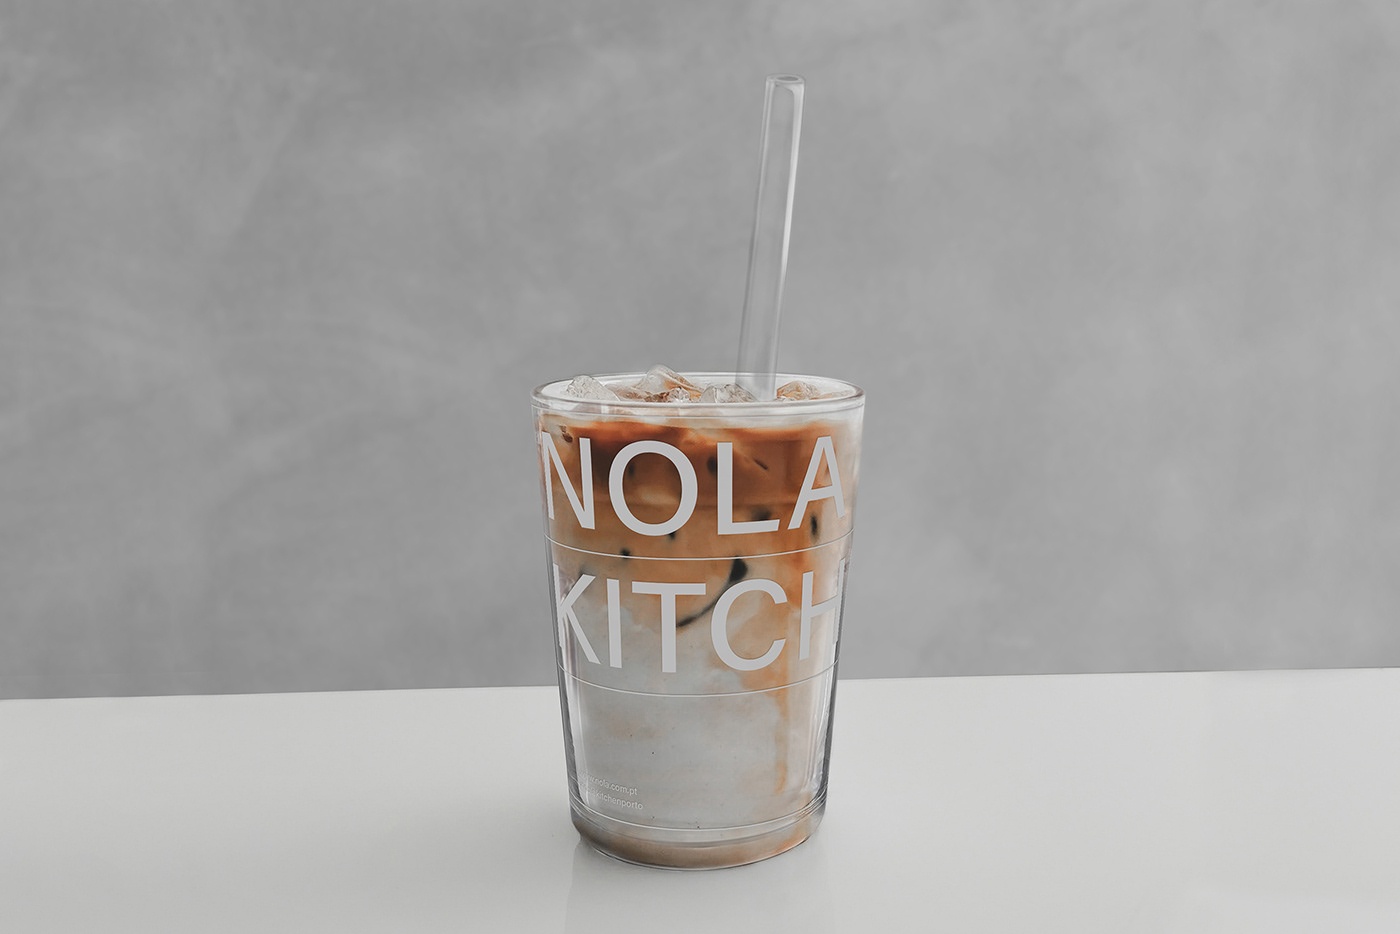 nola healthy natural kitchen Food  Authentic branding  Real farmtotable Ethical